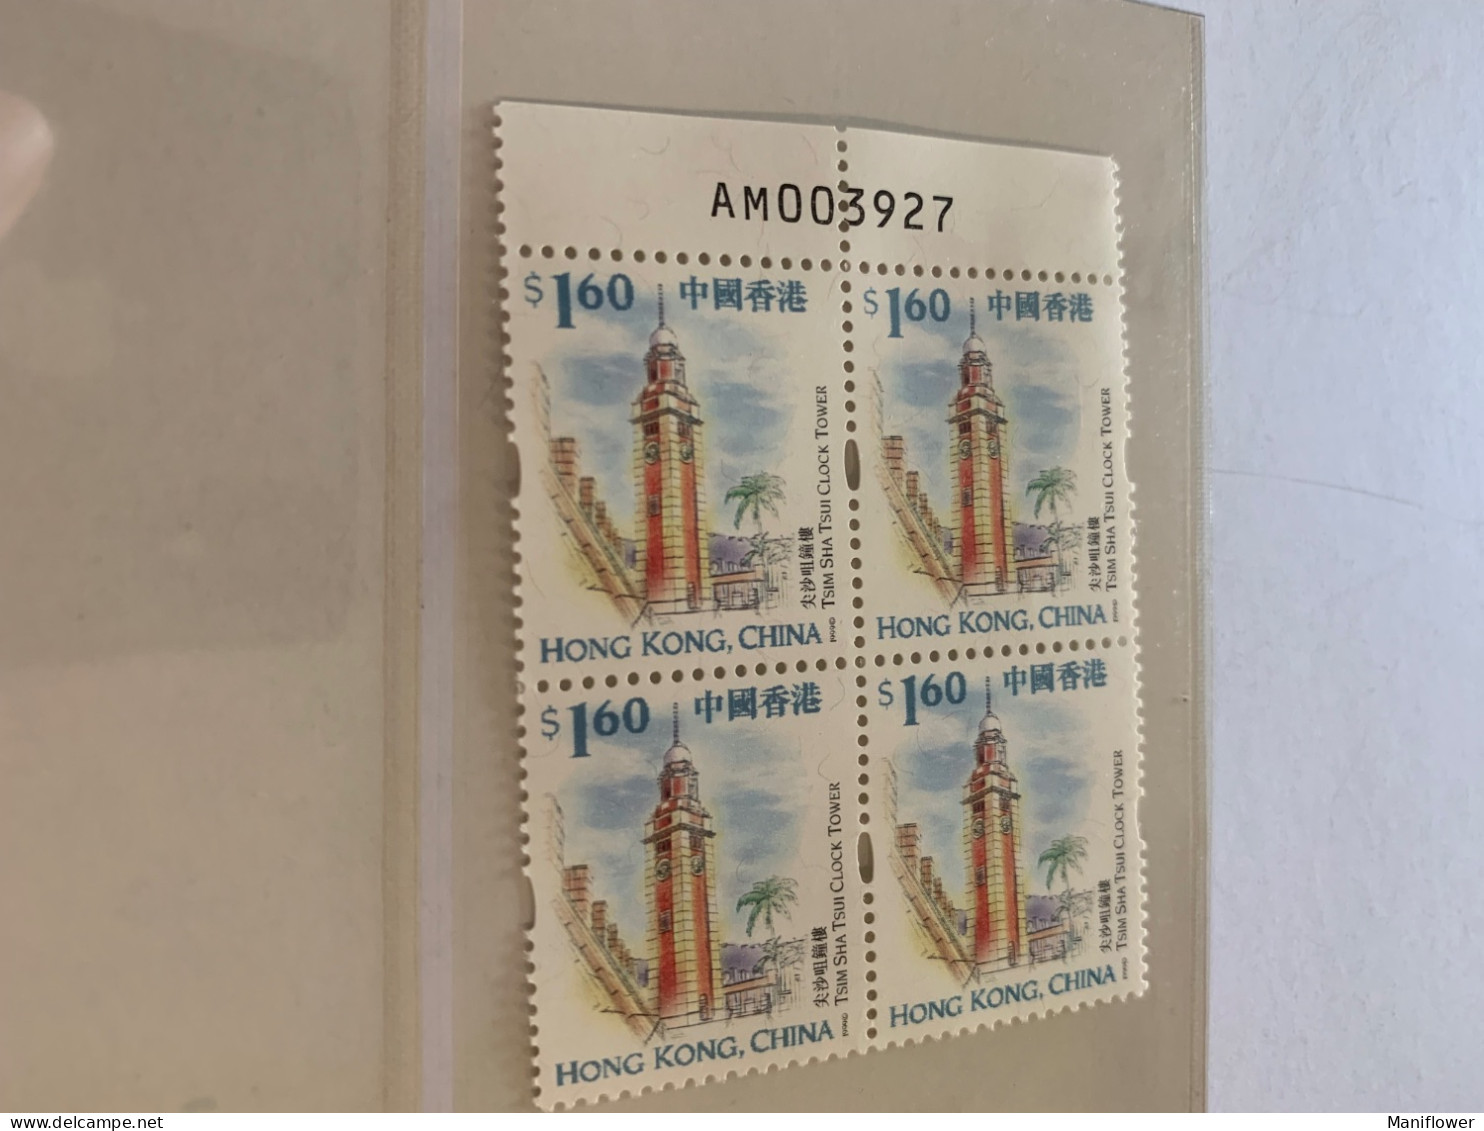 1999 MNH With Numbers Block Tower Clock HK Stamp - Ungebraucht